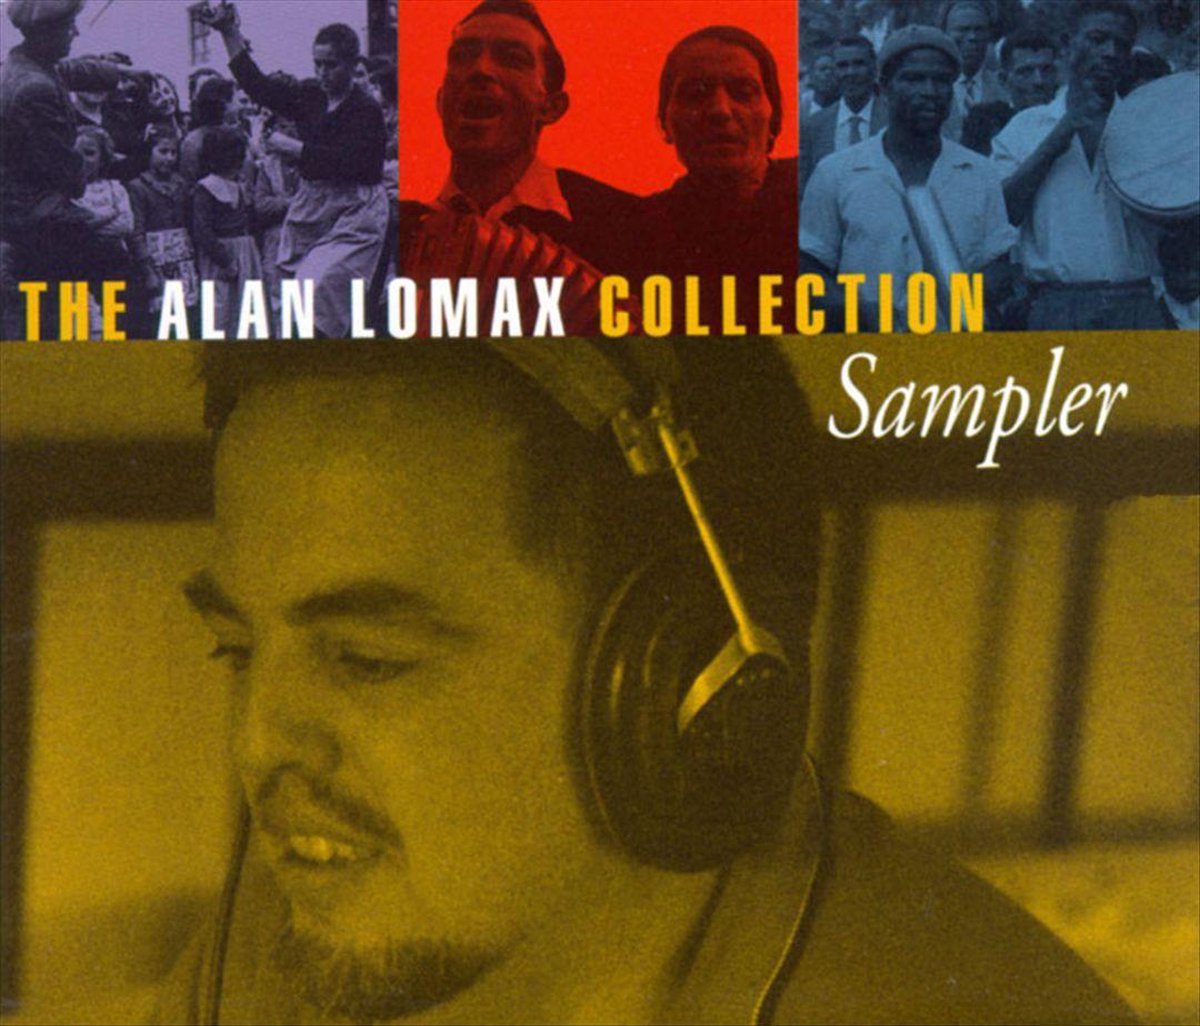 The Alan Lomax Collection Sampler - various artists